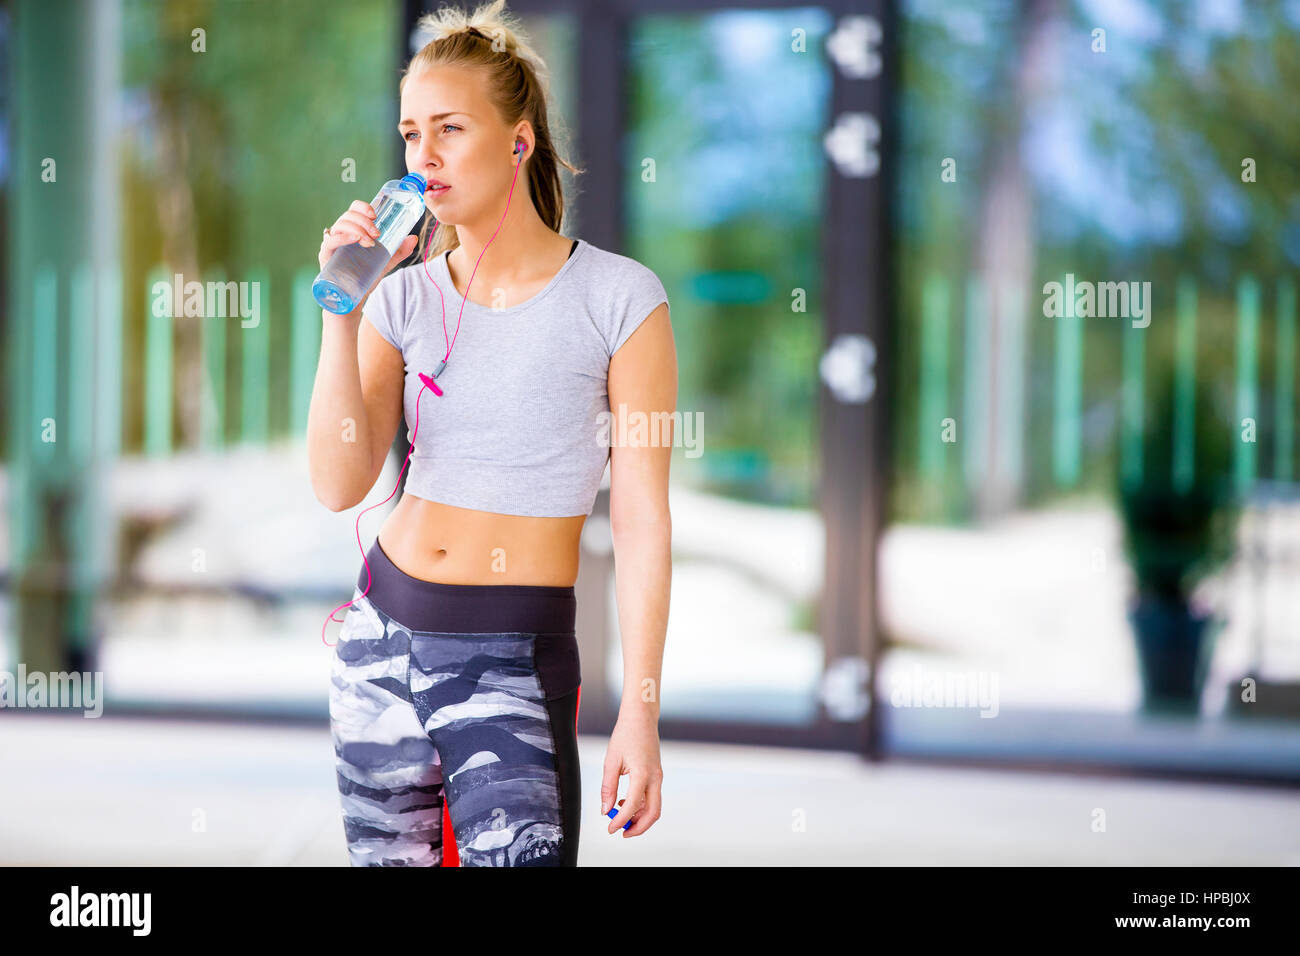 Tired young woman drinking water from bottle after workout outdoors Stock Photo